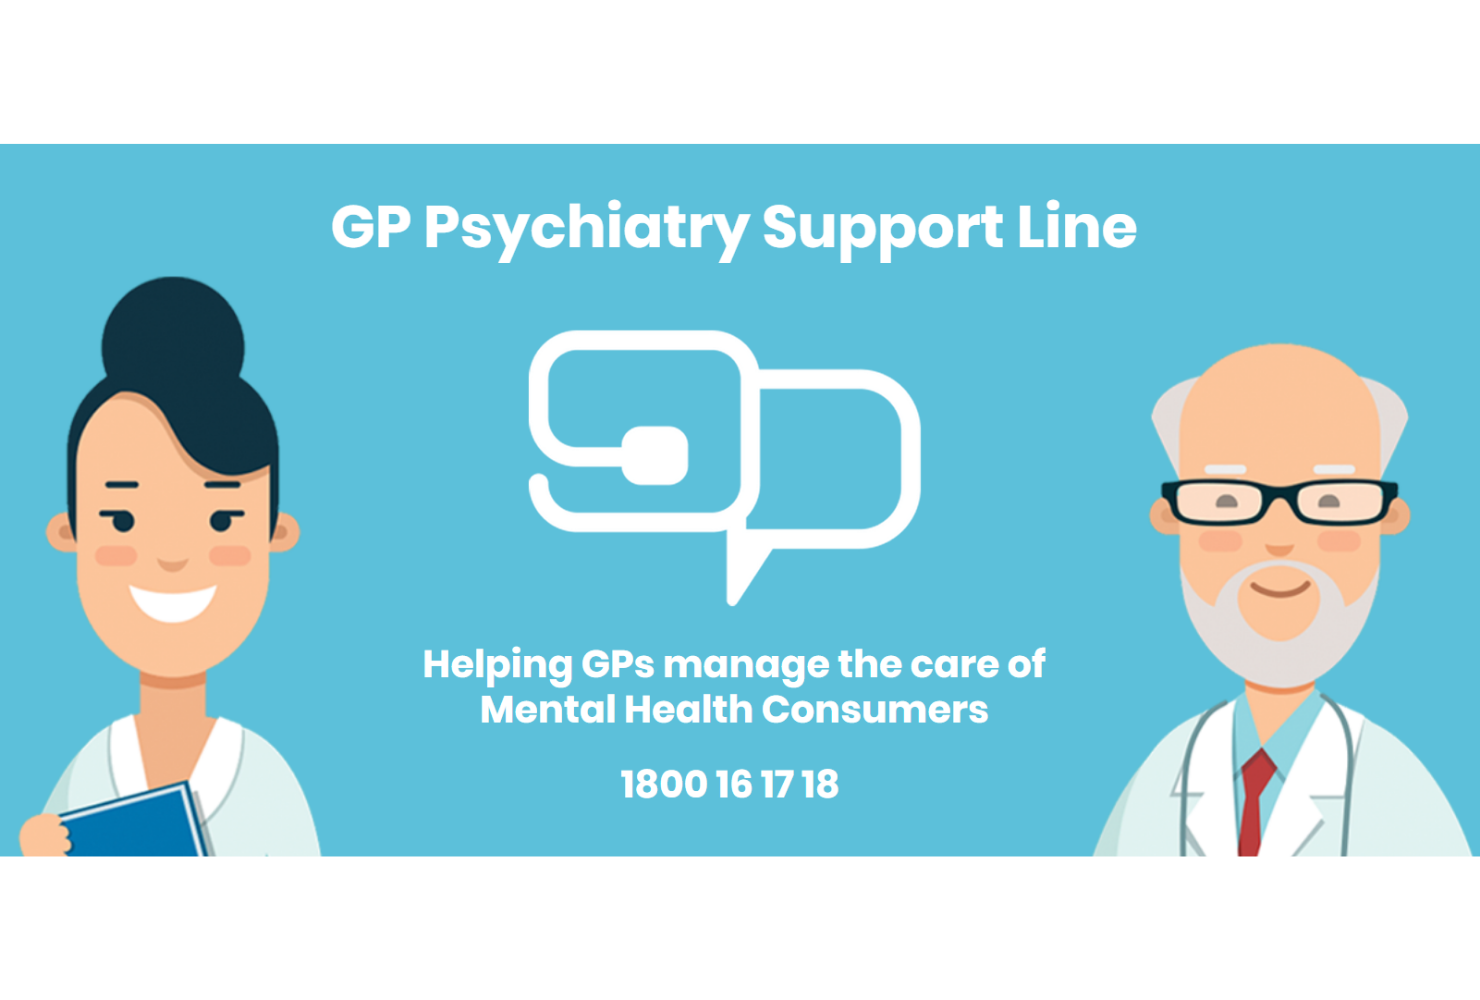 GP Psychiatry Support Line logo. Helping GPs manage the care of Mental Health Consumers 1800 16 17 18.